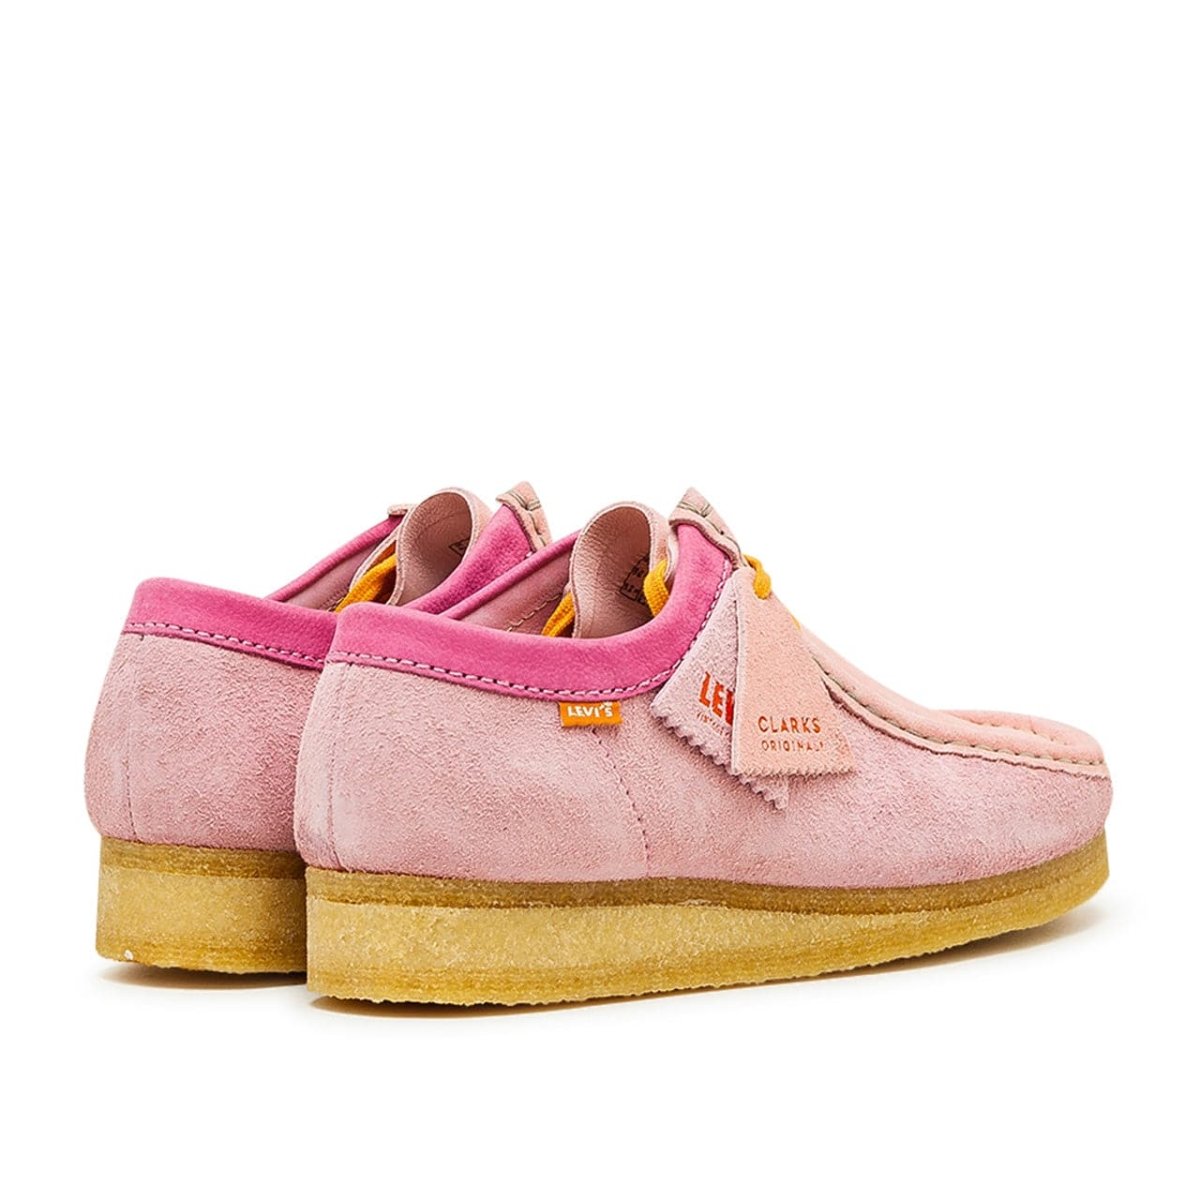 Clarks Originals x Levi's Vintage Clothing Wallabee (Pink) -261603227 –  Allike Store